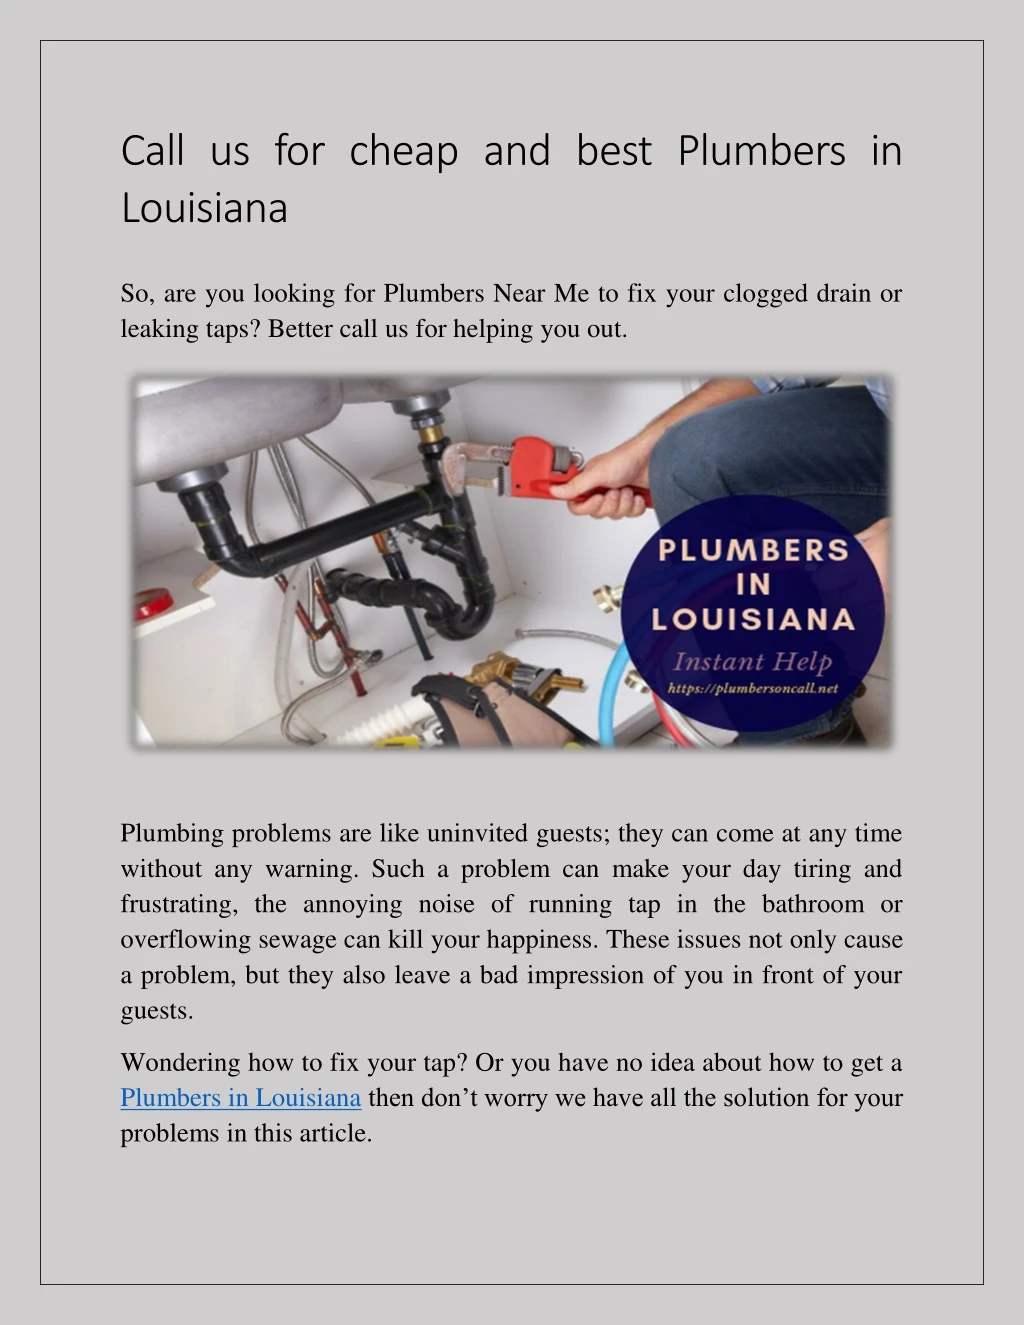 call us for cheap and best plumbers in louisiana